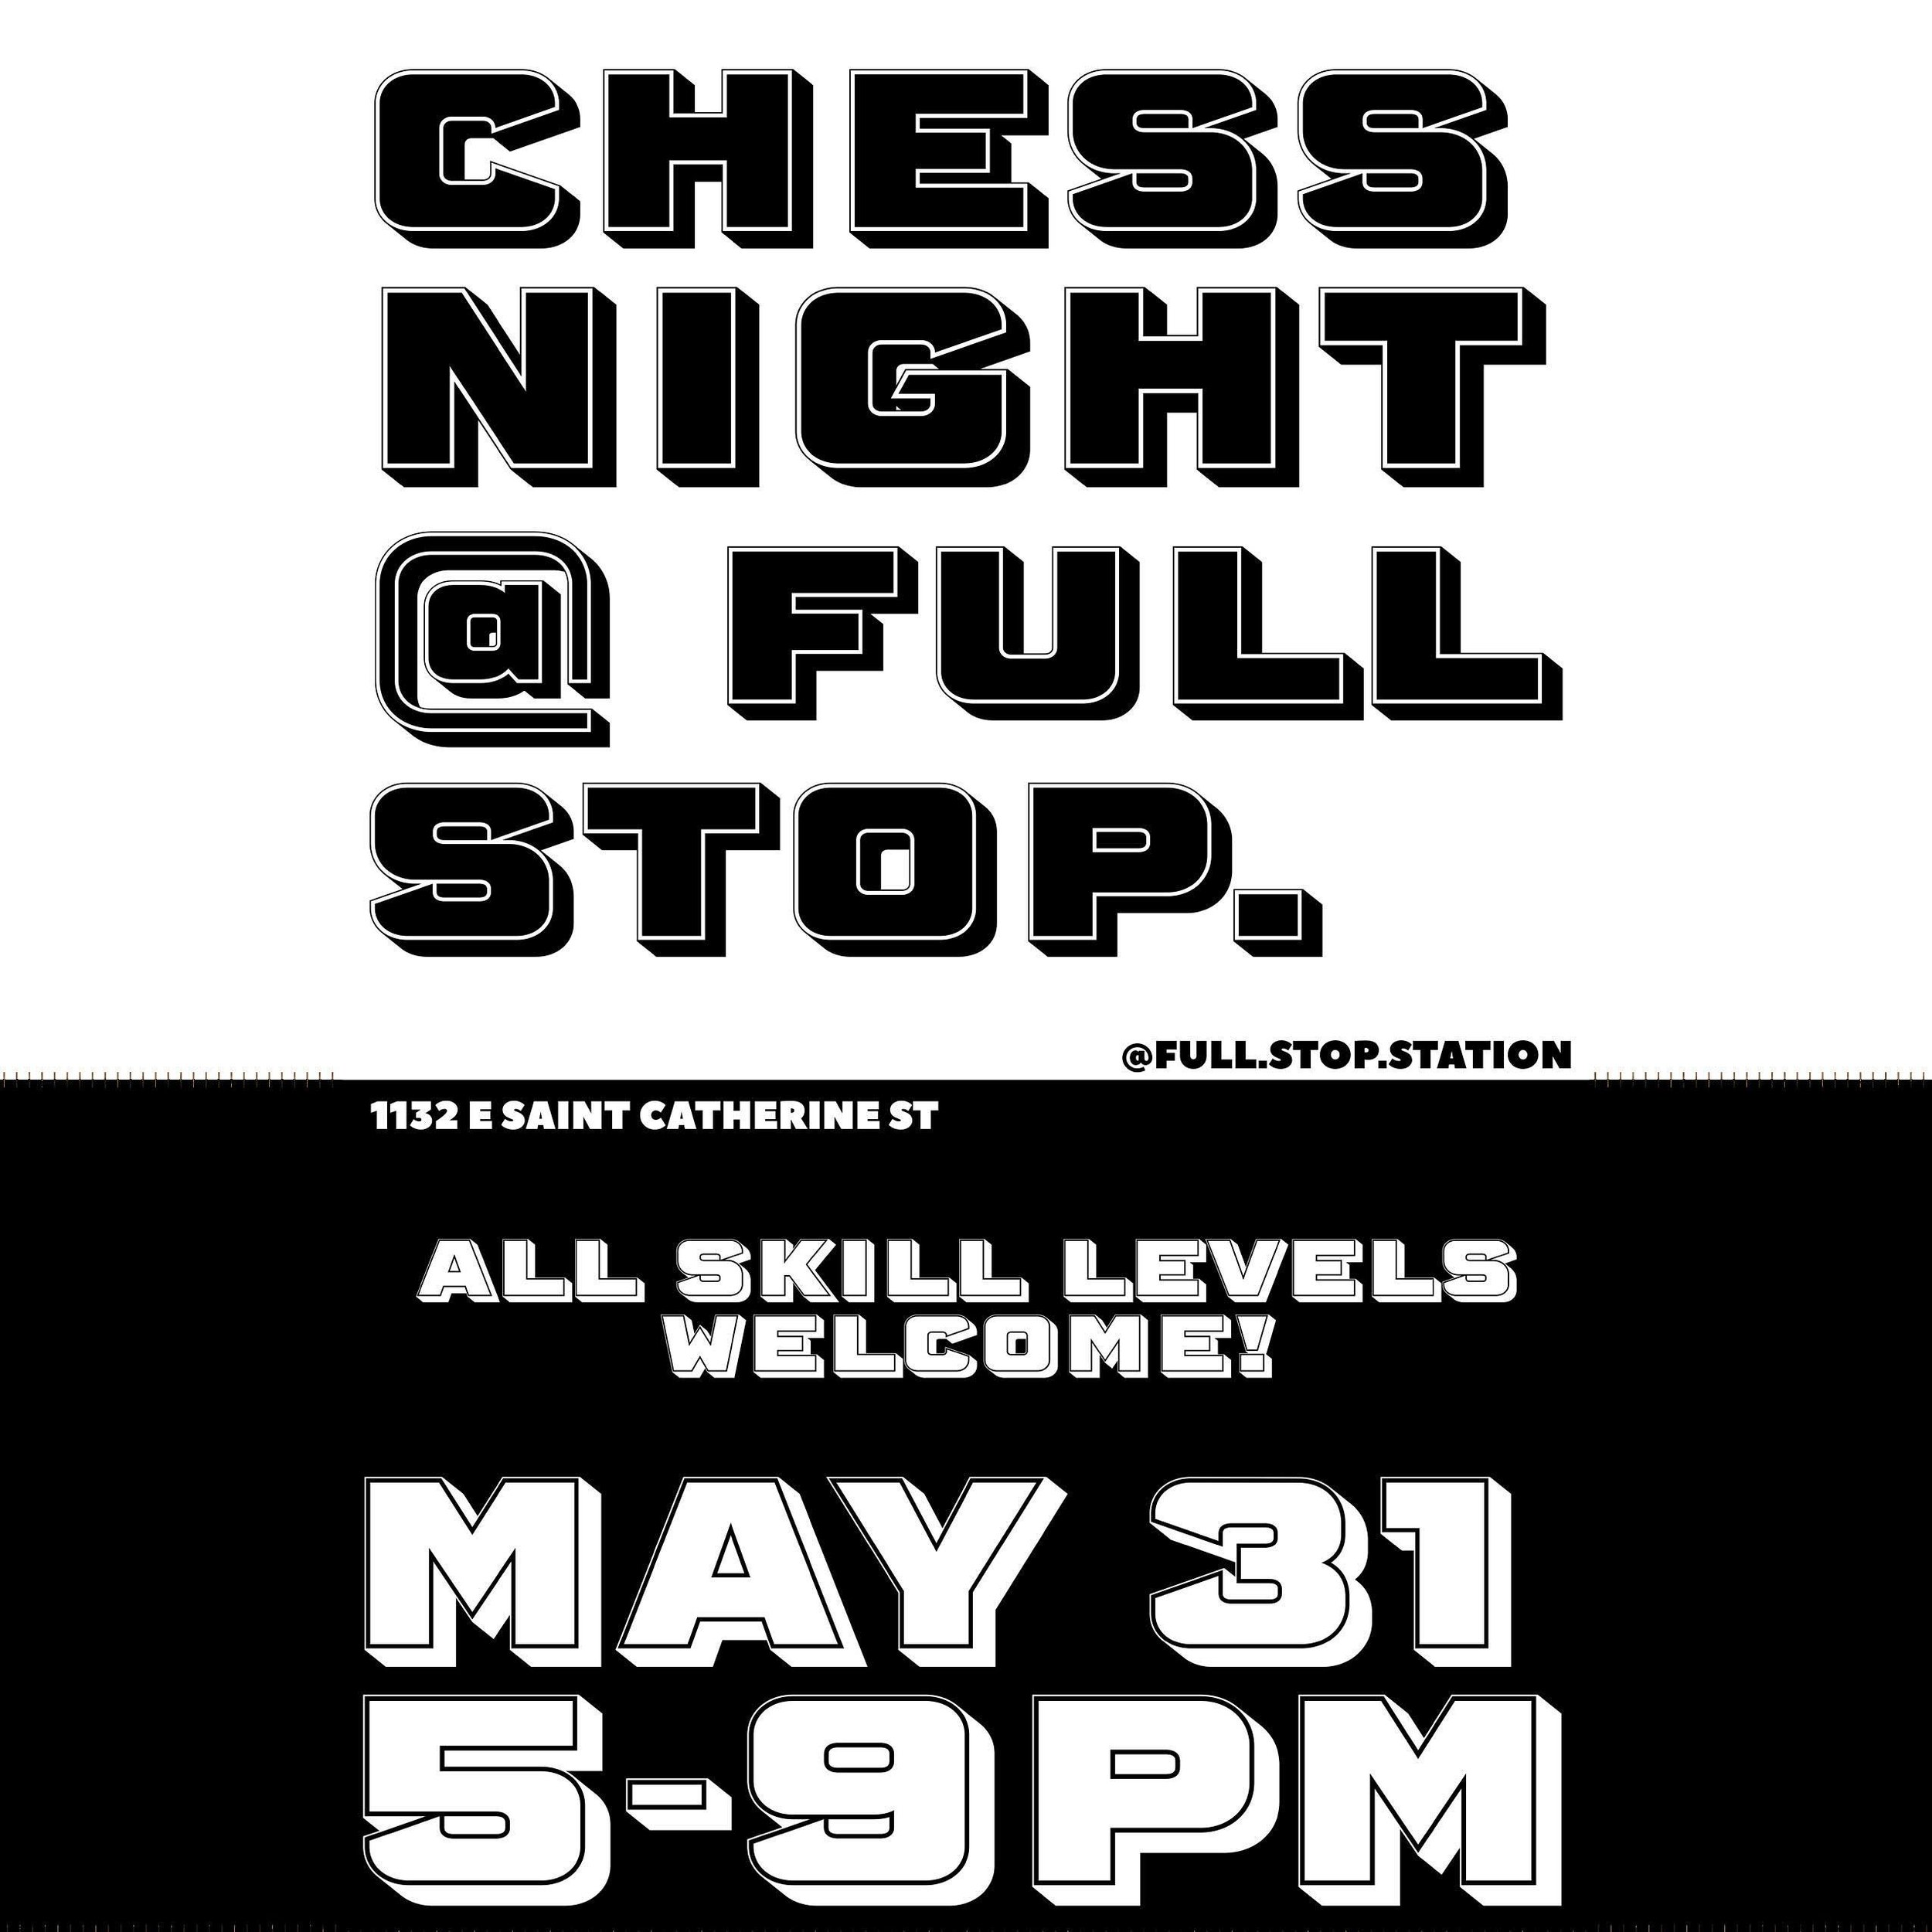 Chess Night is back on the 31st!!! @counterservice_ will be joining us once again for a night of games, drinks, and delicious food. ♟️🧆🍻☕️

Come play from 5-9, food starts at 6 and lasts until it&rsquo;s sold out!